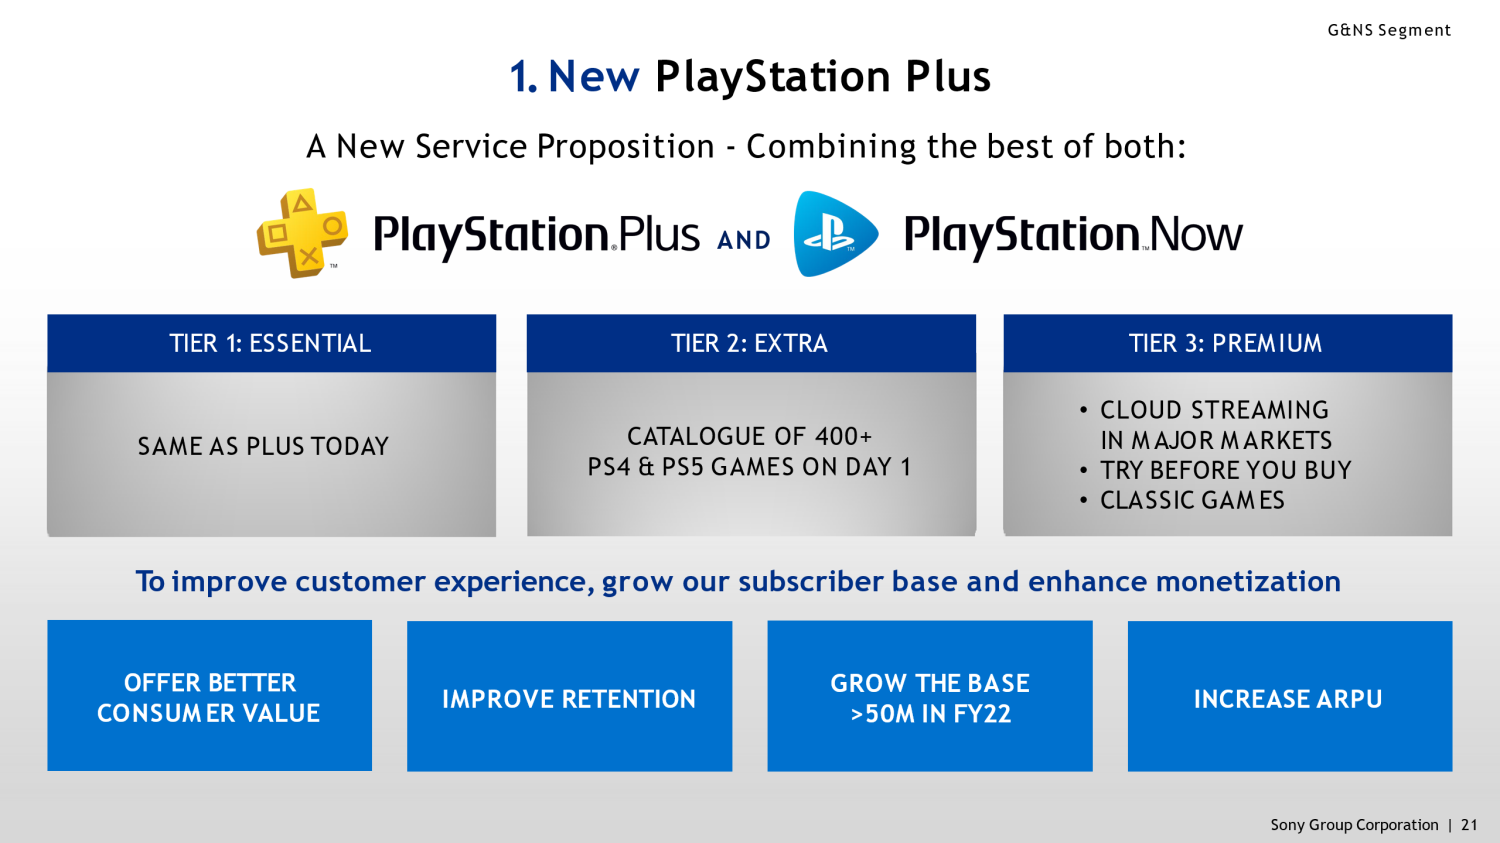 PS Now Has a Respectable 3.2 Million Subscribers